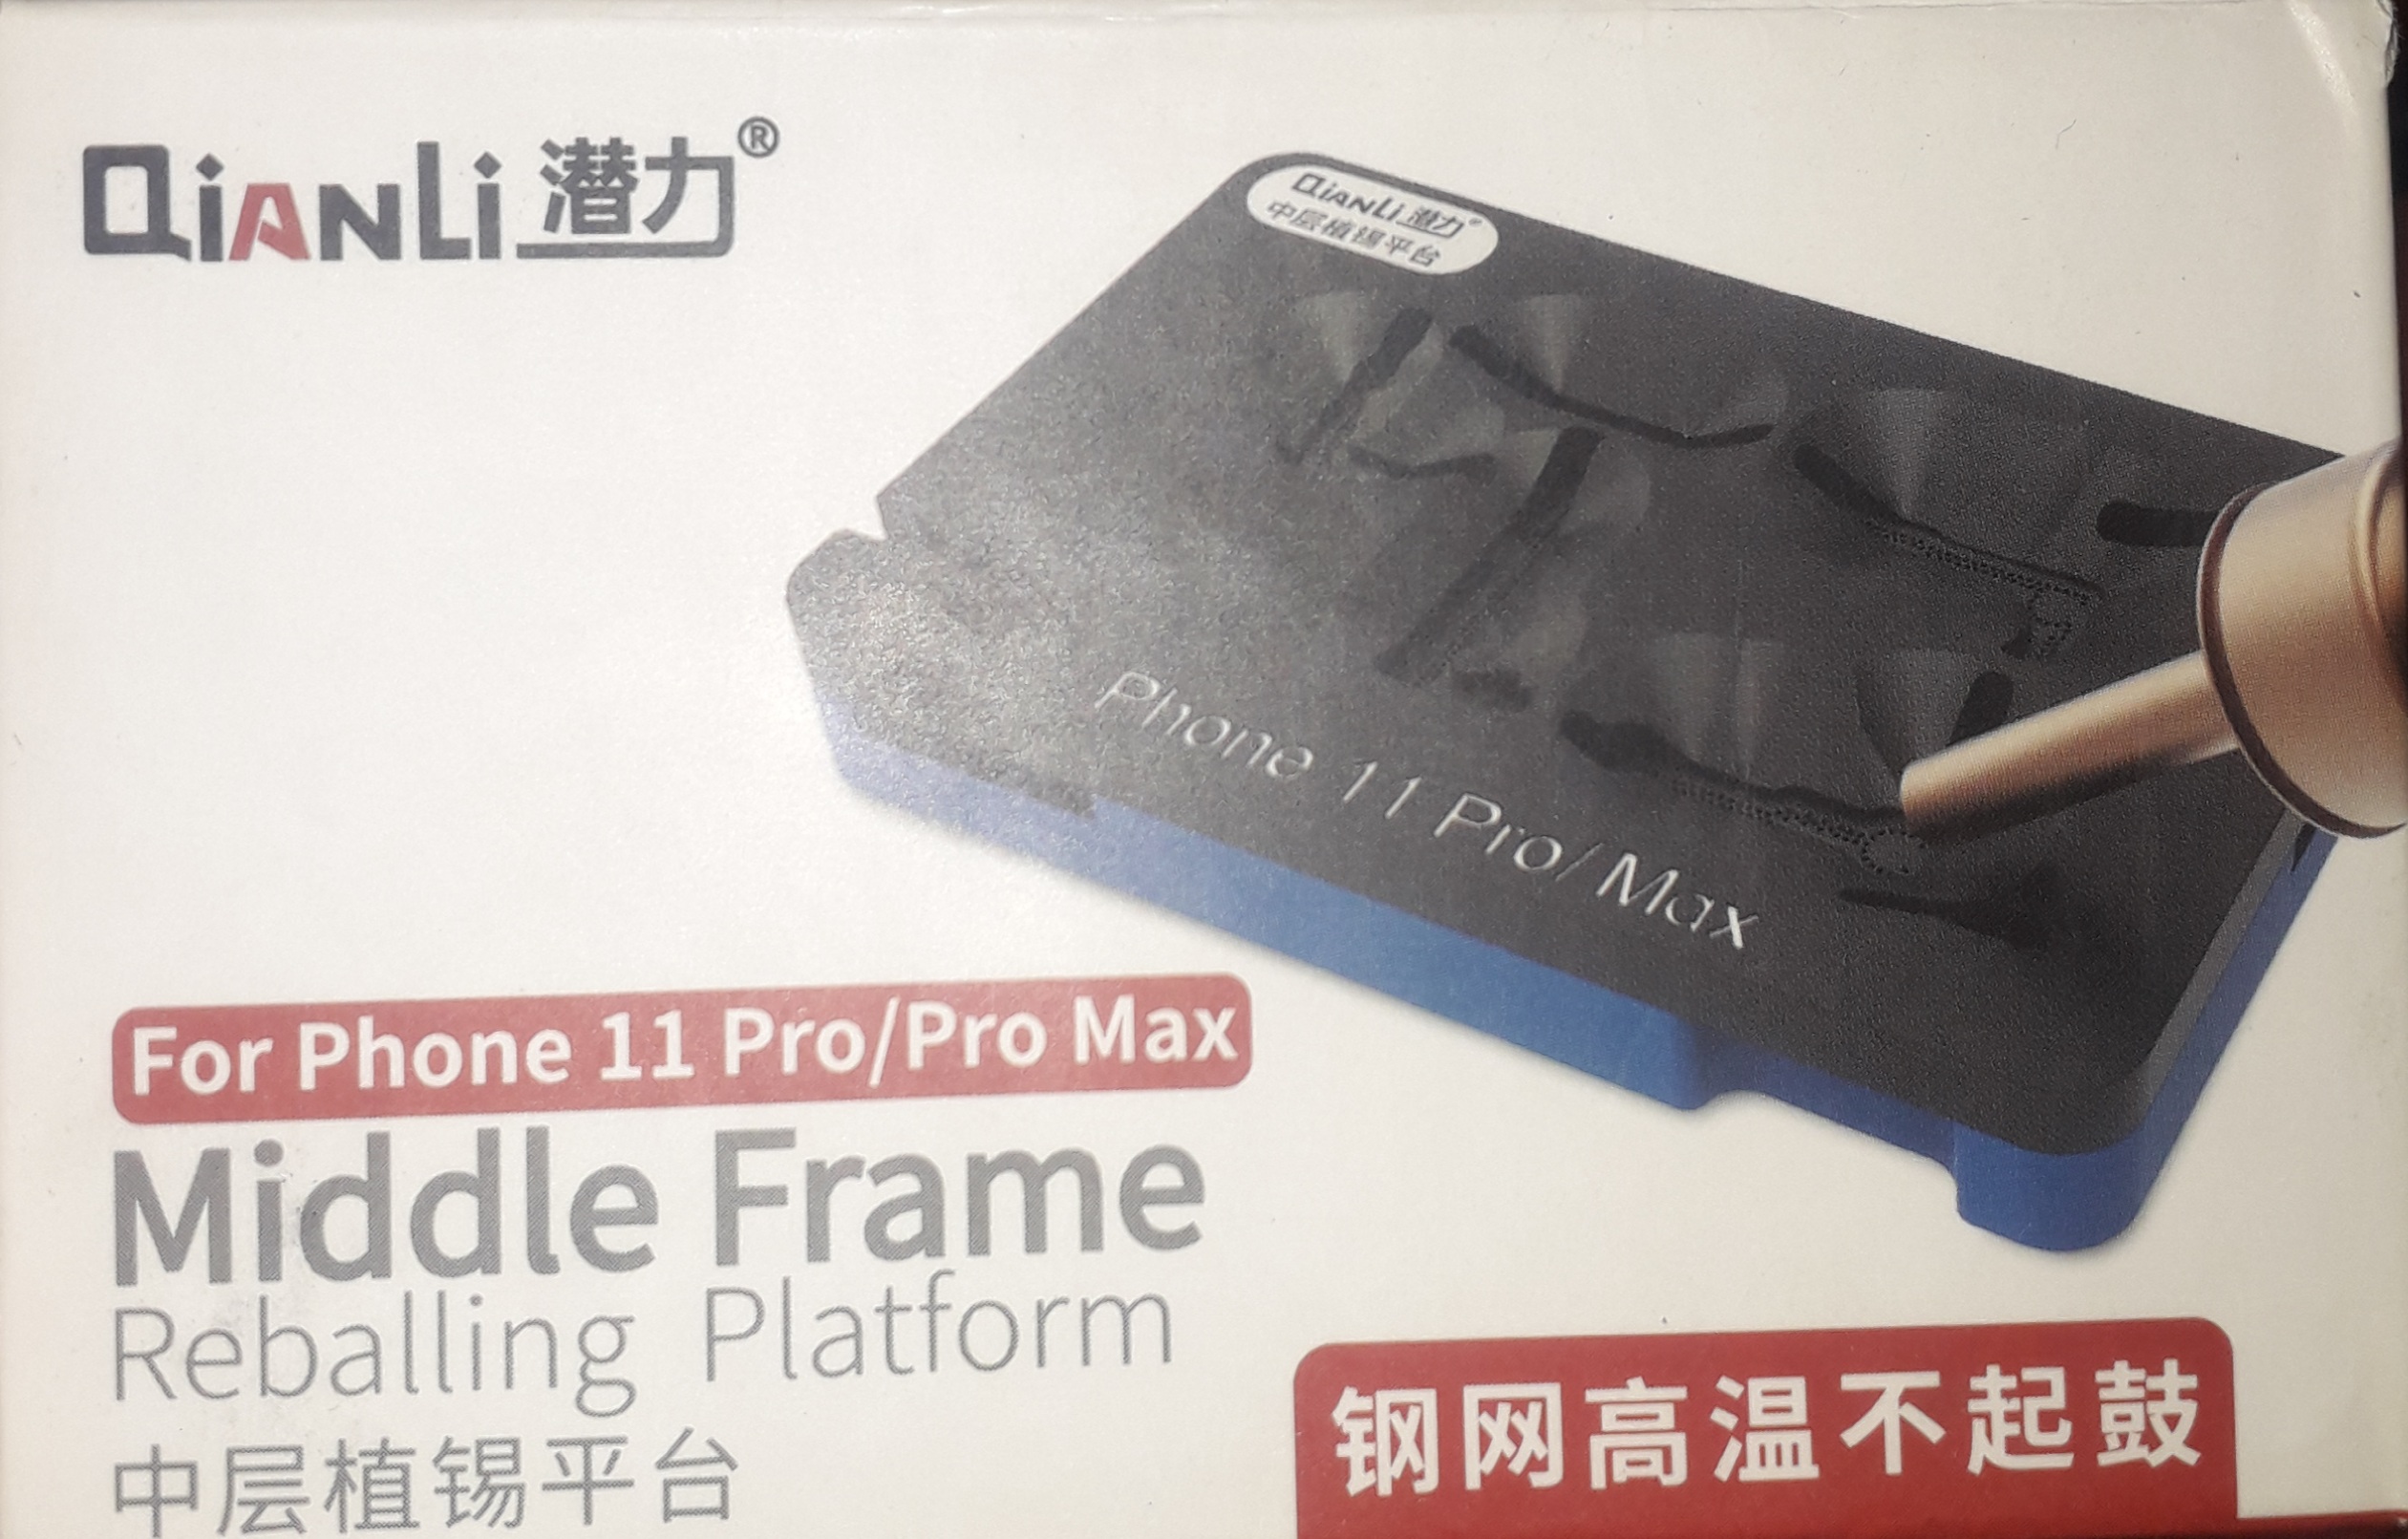 TOOL QIANLI  MIDDLE FRAM IPHONE 11PRO _MAX